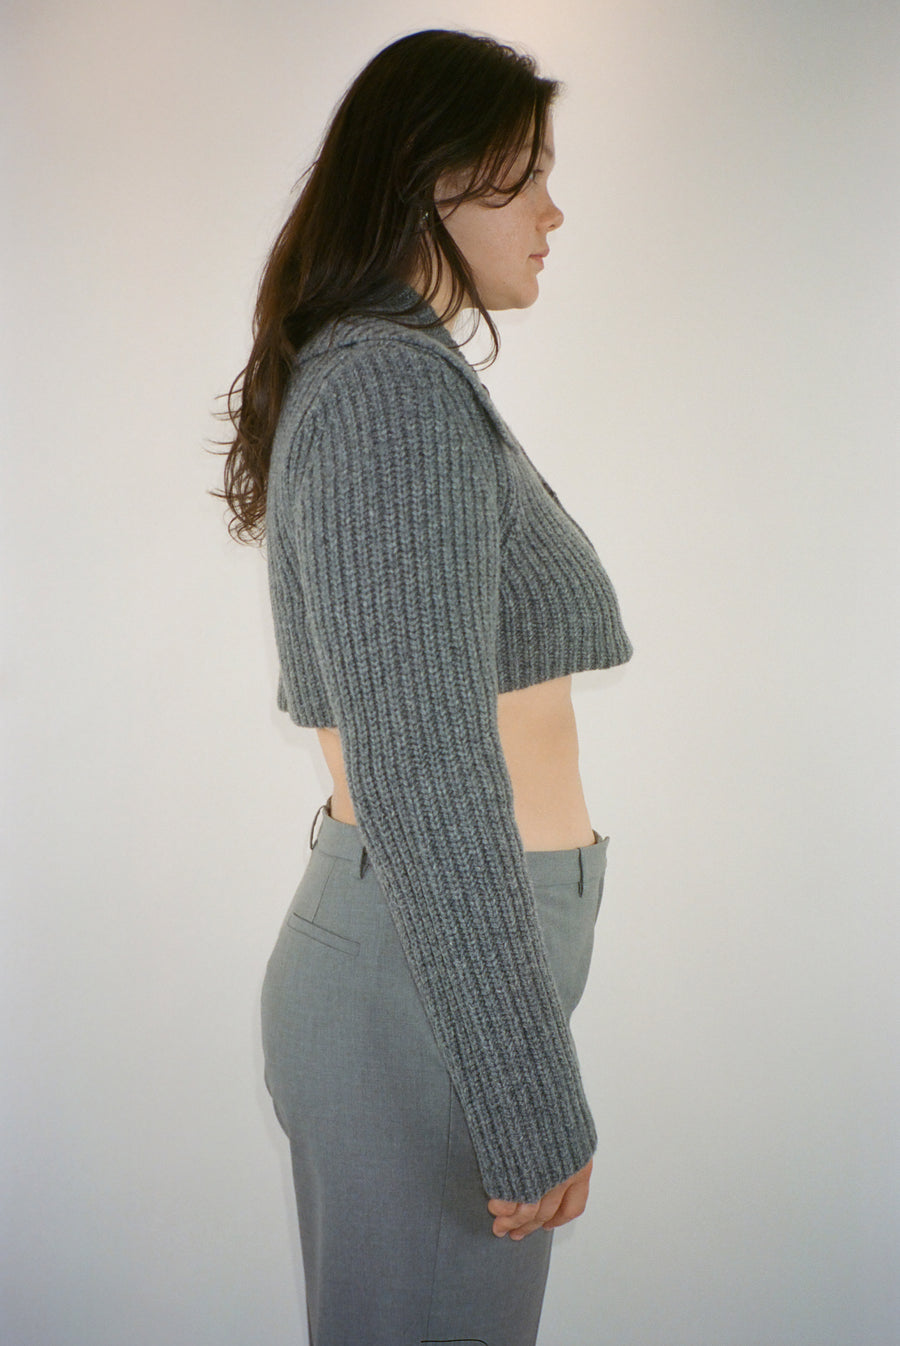 Cropped cardigan sweater in grey with button closure on model